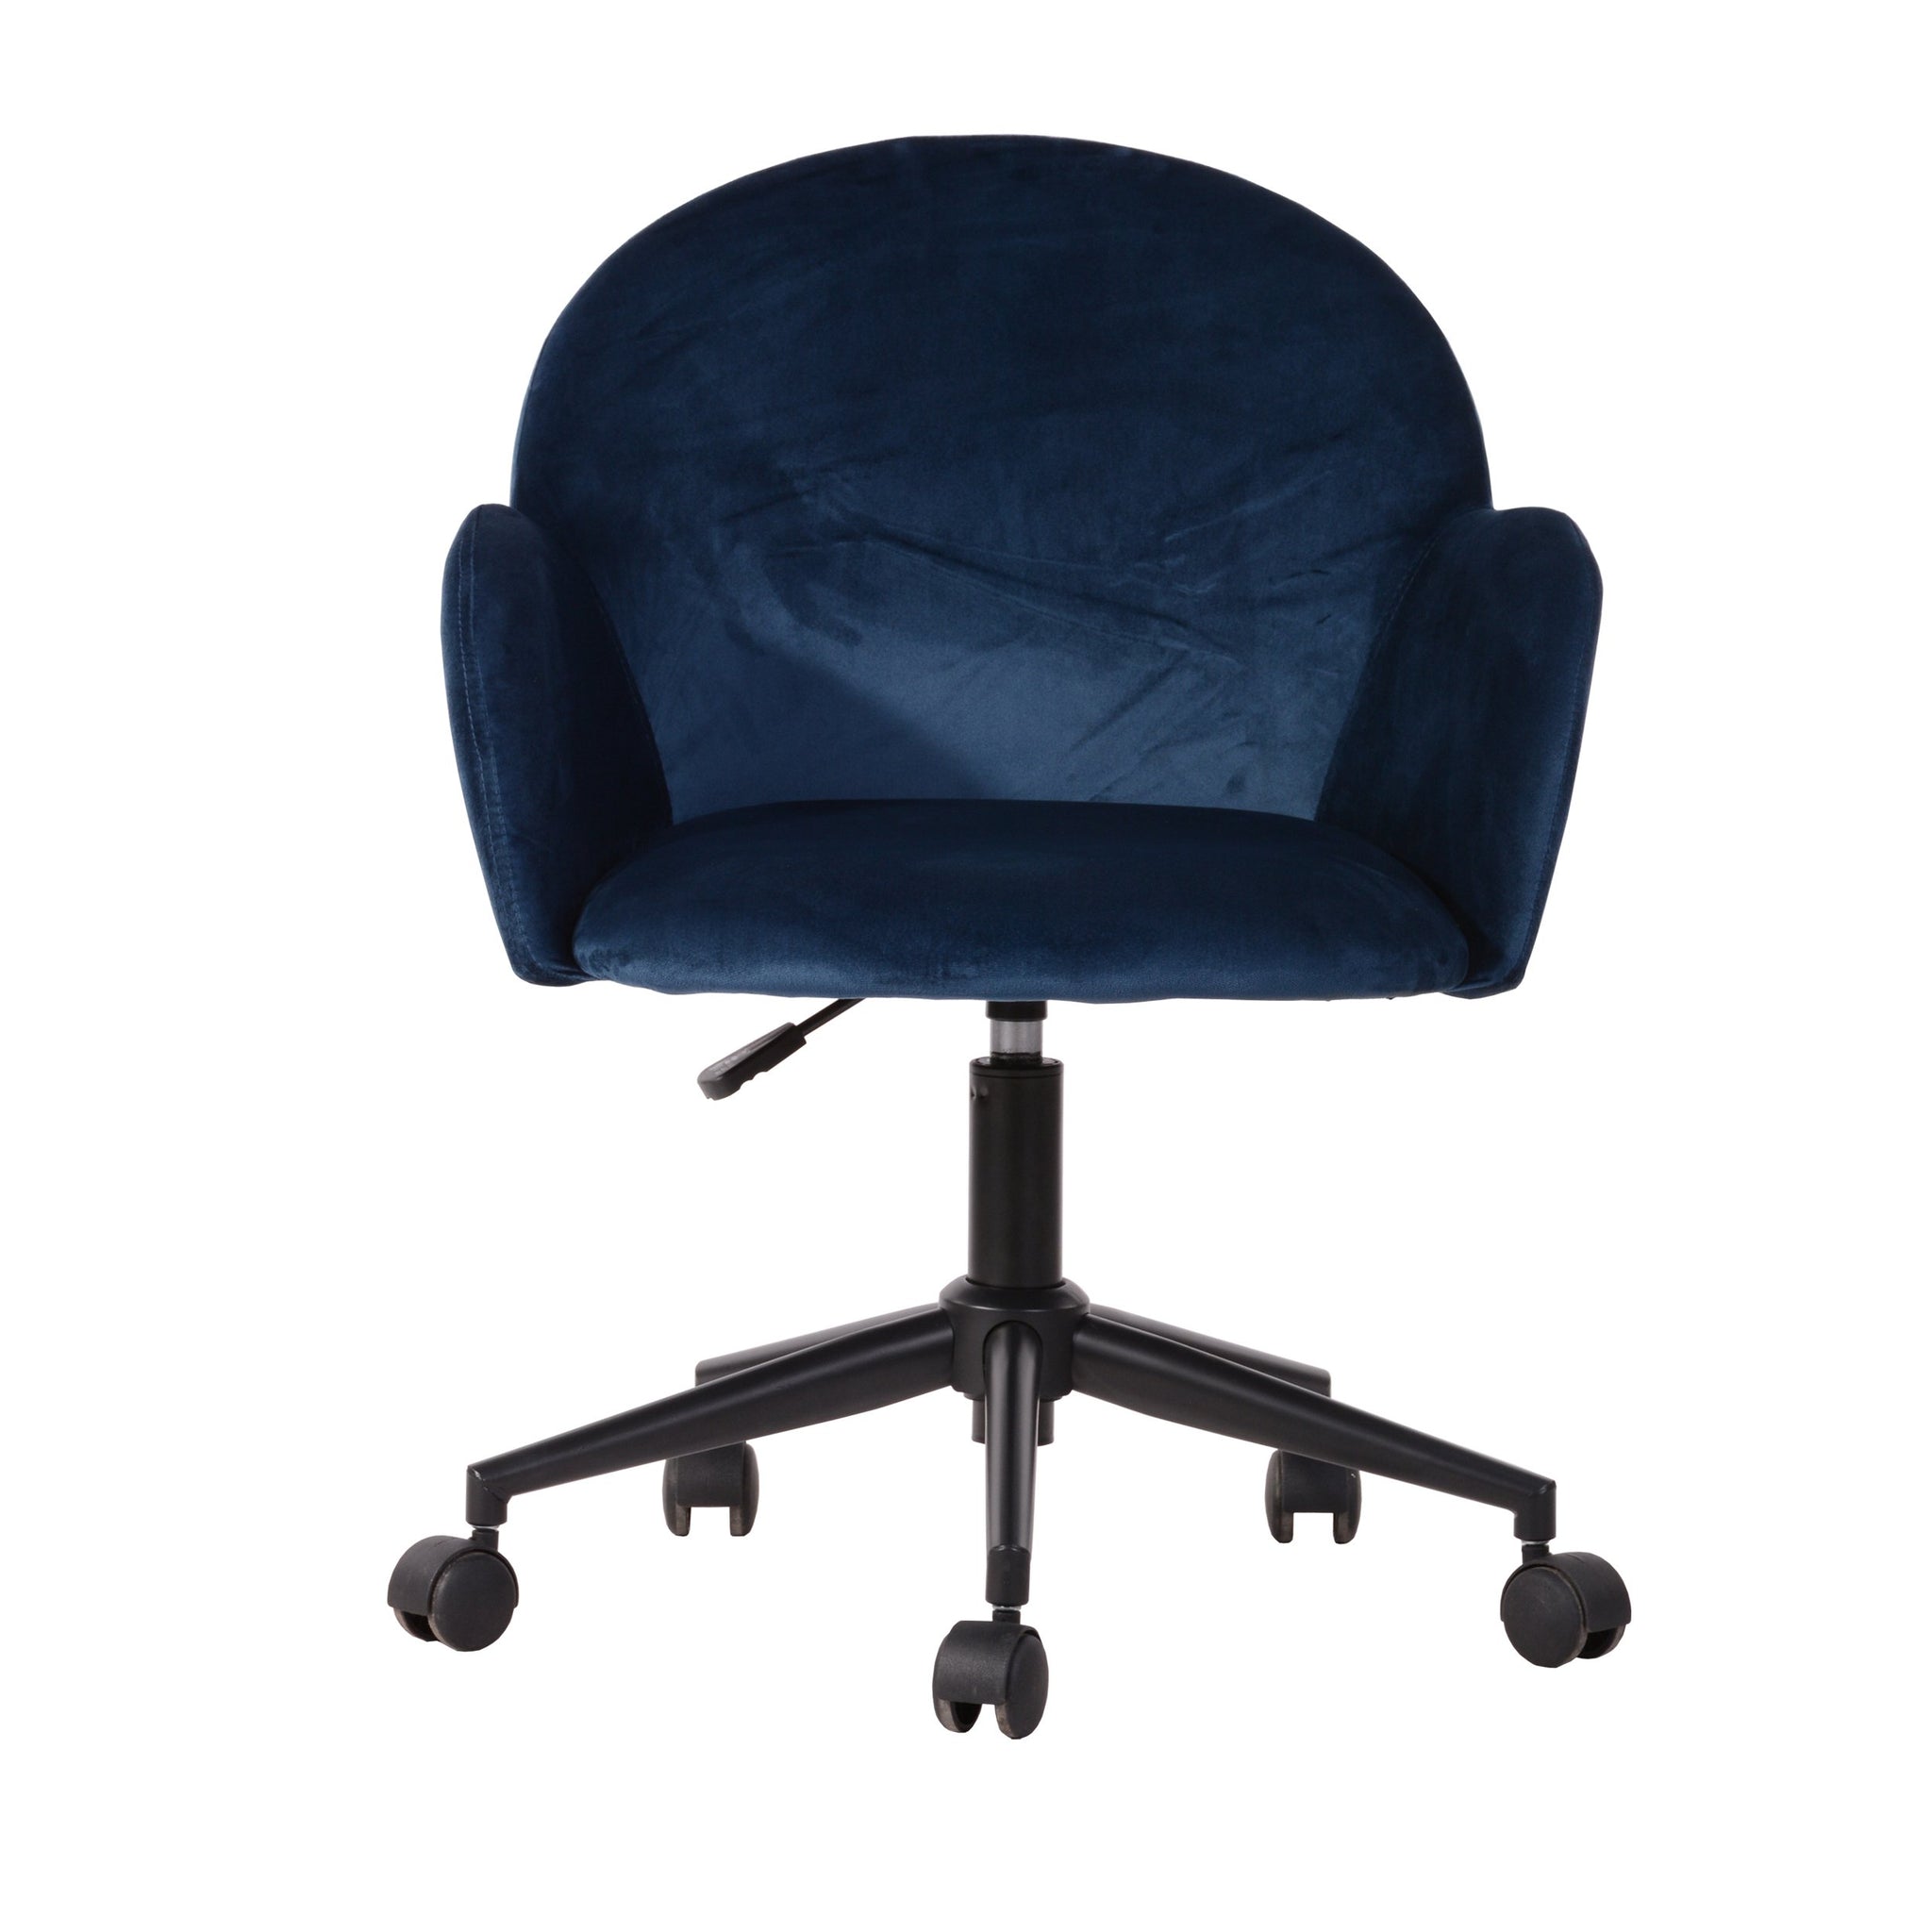 An Office Chair with Perfect Velvet Upholstery